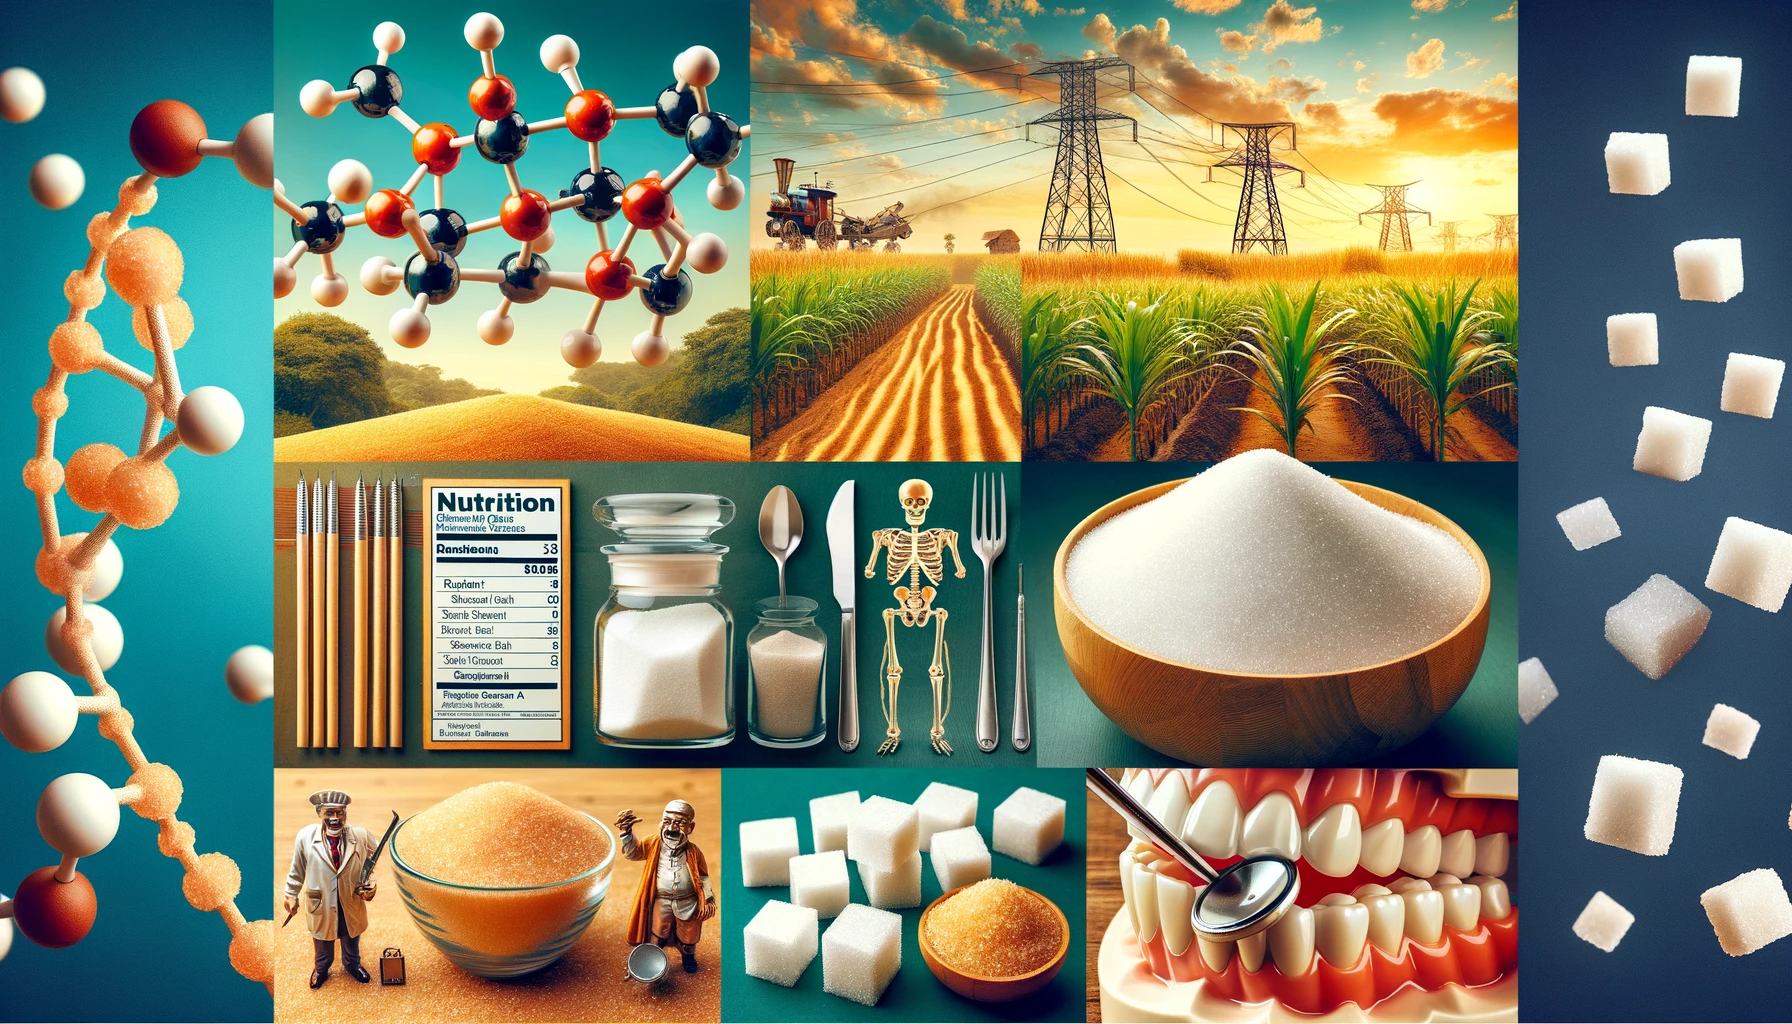 This informative collage on sugar includes a variety of elements. It features the molecular structure of sucrose, showing the chemical bonds and arrangement. There's a scenic view of a sugarcane field, representing sugar's natural source. The image also includes a bowl filled with white and brown sugar crystals, showcasing different types of sugar. A nutrition label is displayed, highlighting the sugar content in food products. A dentist is shown warning about the risks of tooth decay due to sugar consumption. Lastly, the collage includes a historical scene depicting the sugar trade, reflecting its economic and historical significance.